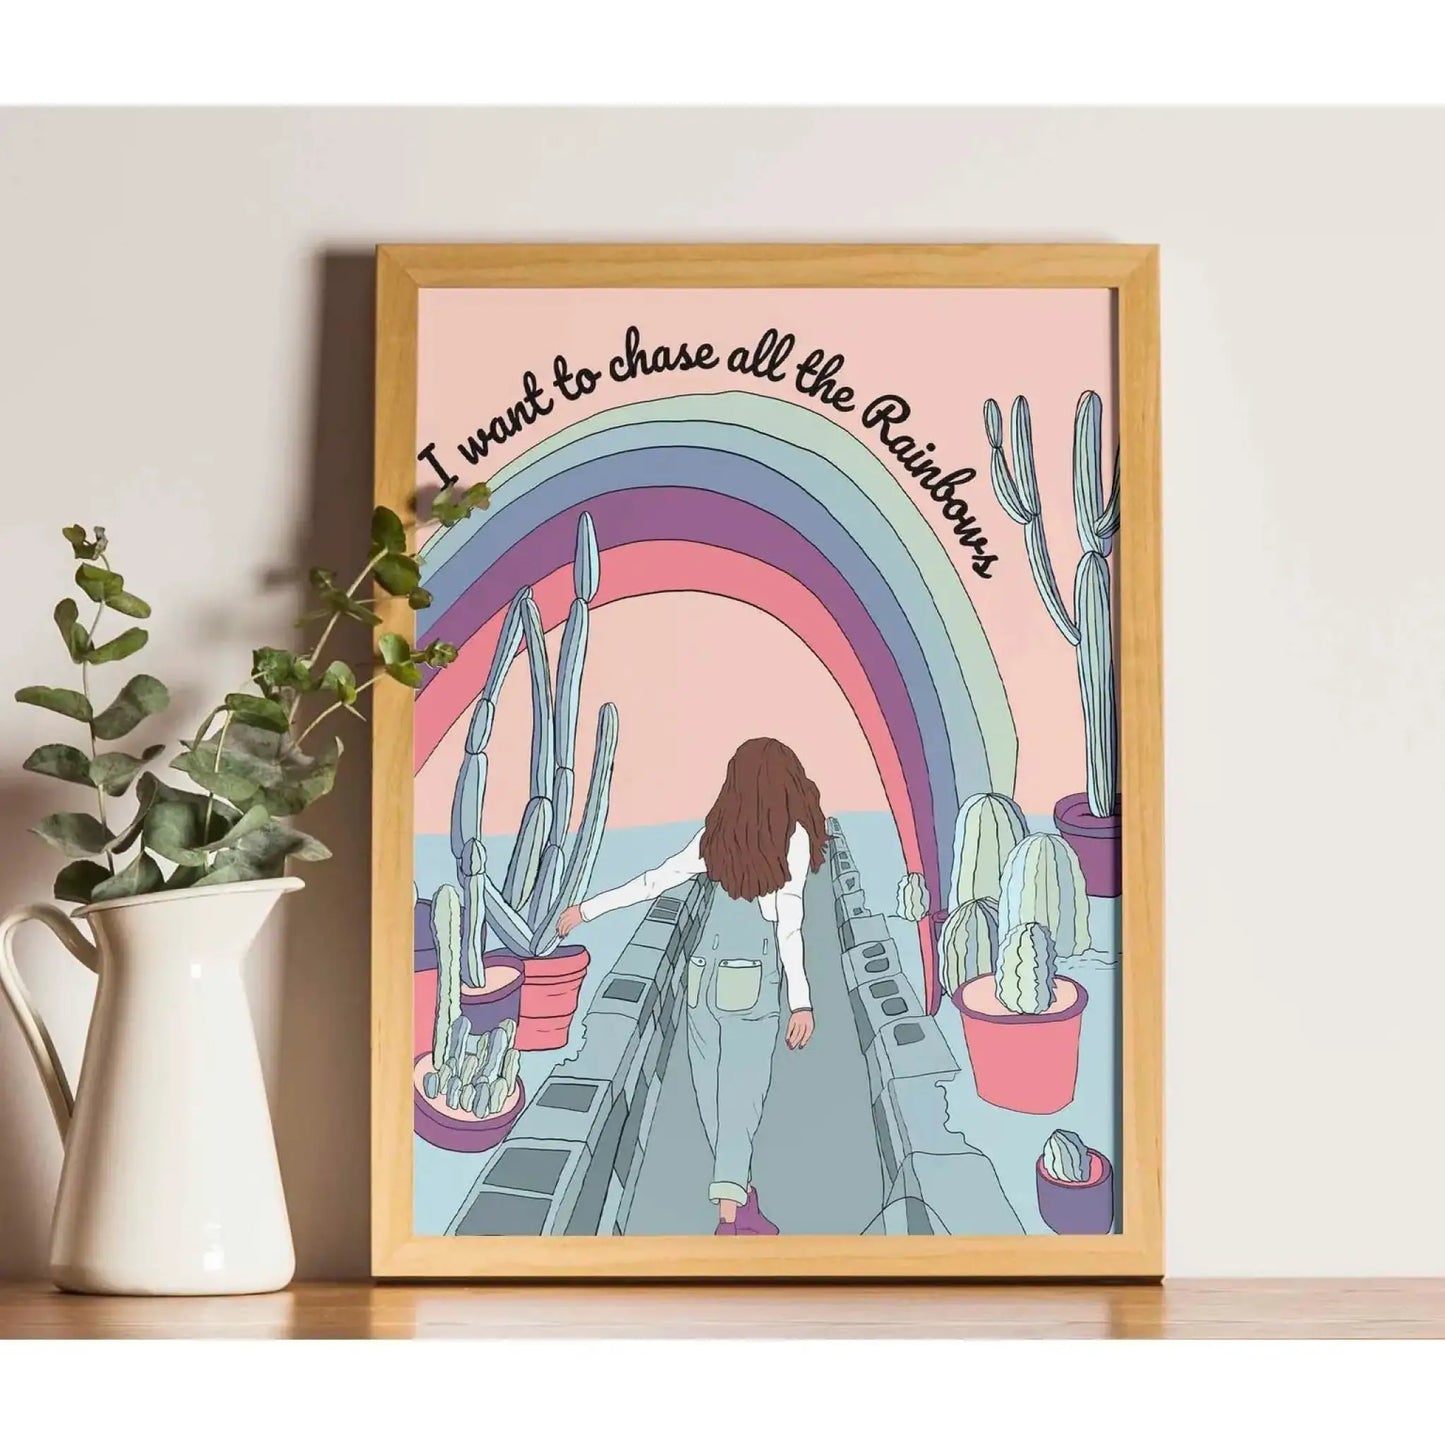 I Want to Chase All the Rainbows Art Print